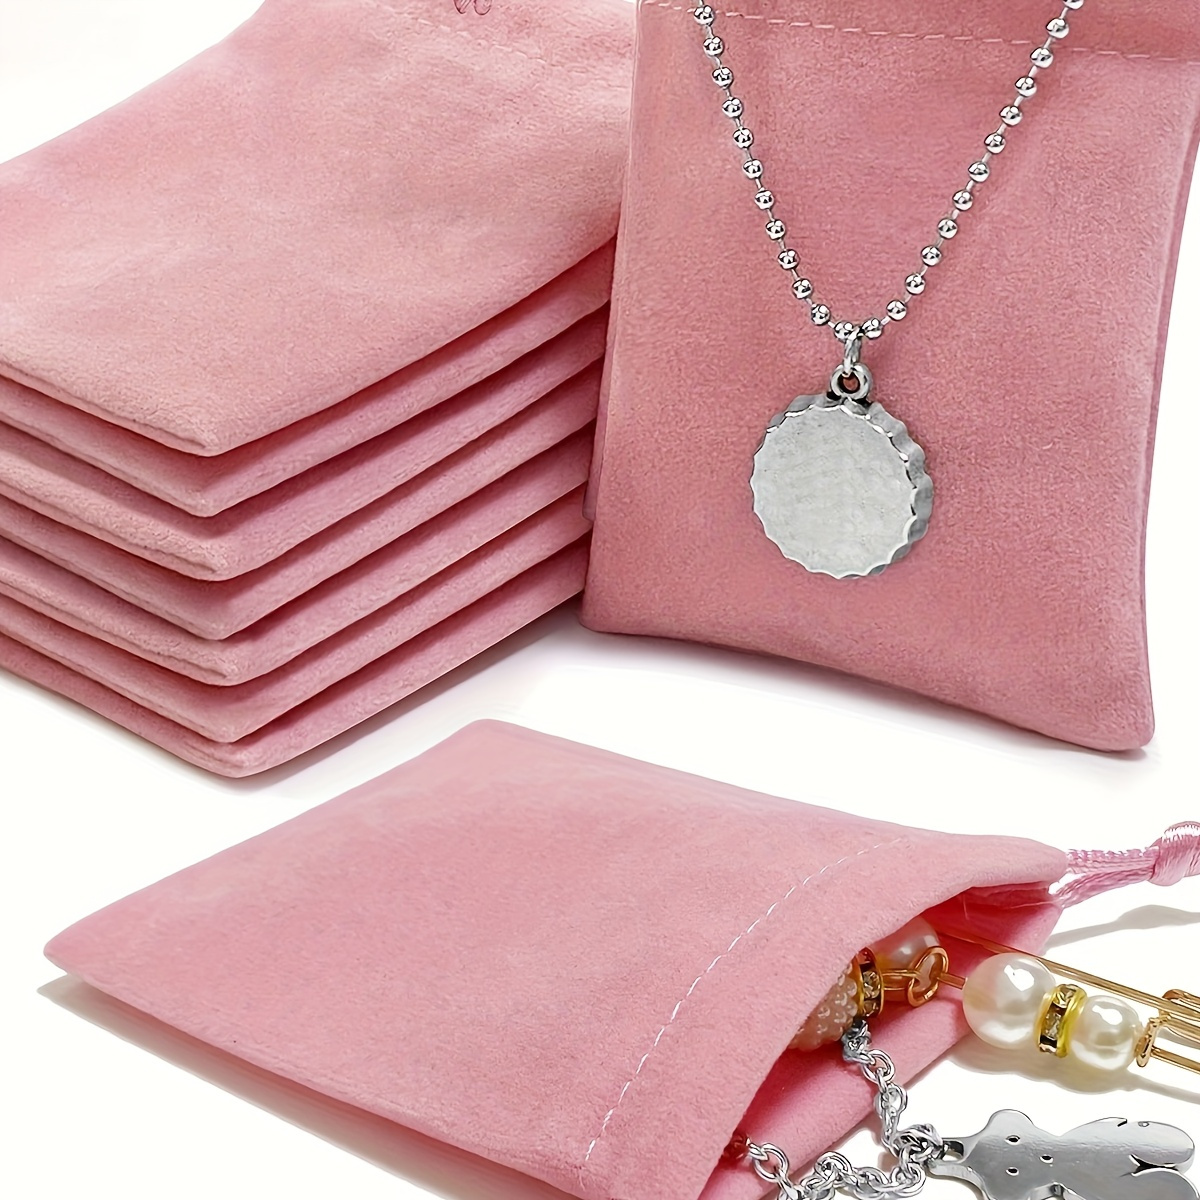 

10pcs Pink Velvet Jewelry Pouches With Drawstring, Washable And Foldable Fabric Gift Bags For Wedding, Party, Valentine's Day, Anniversary.